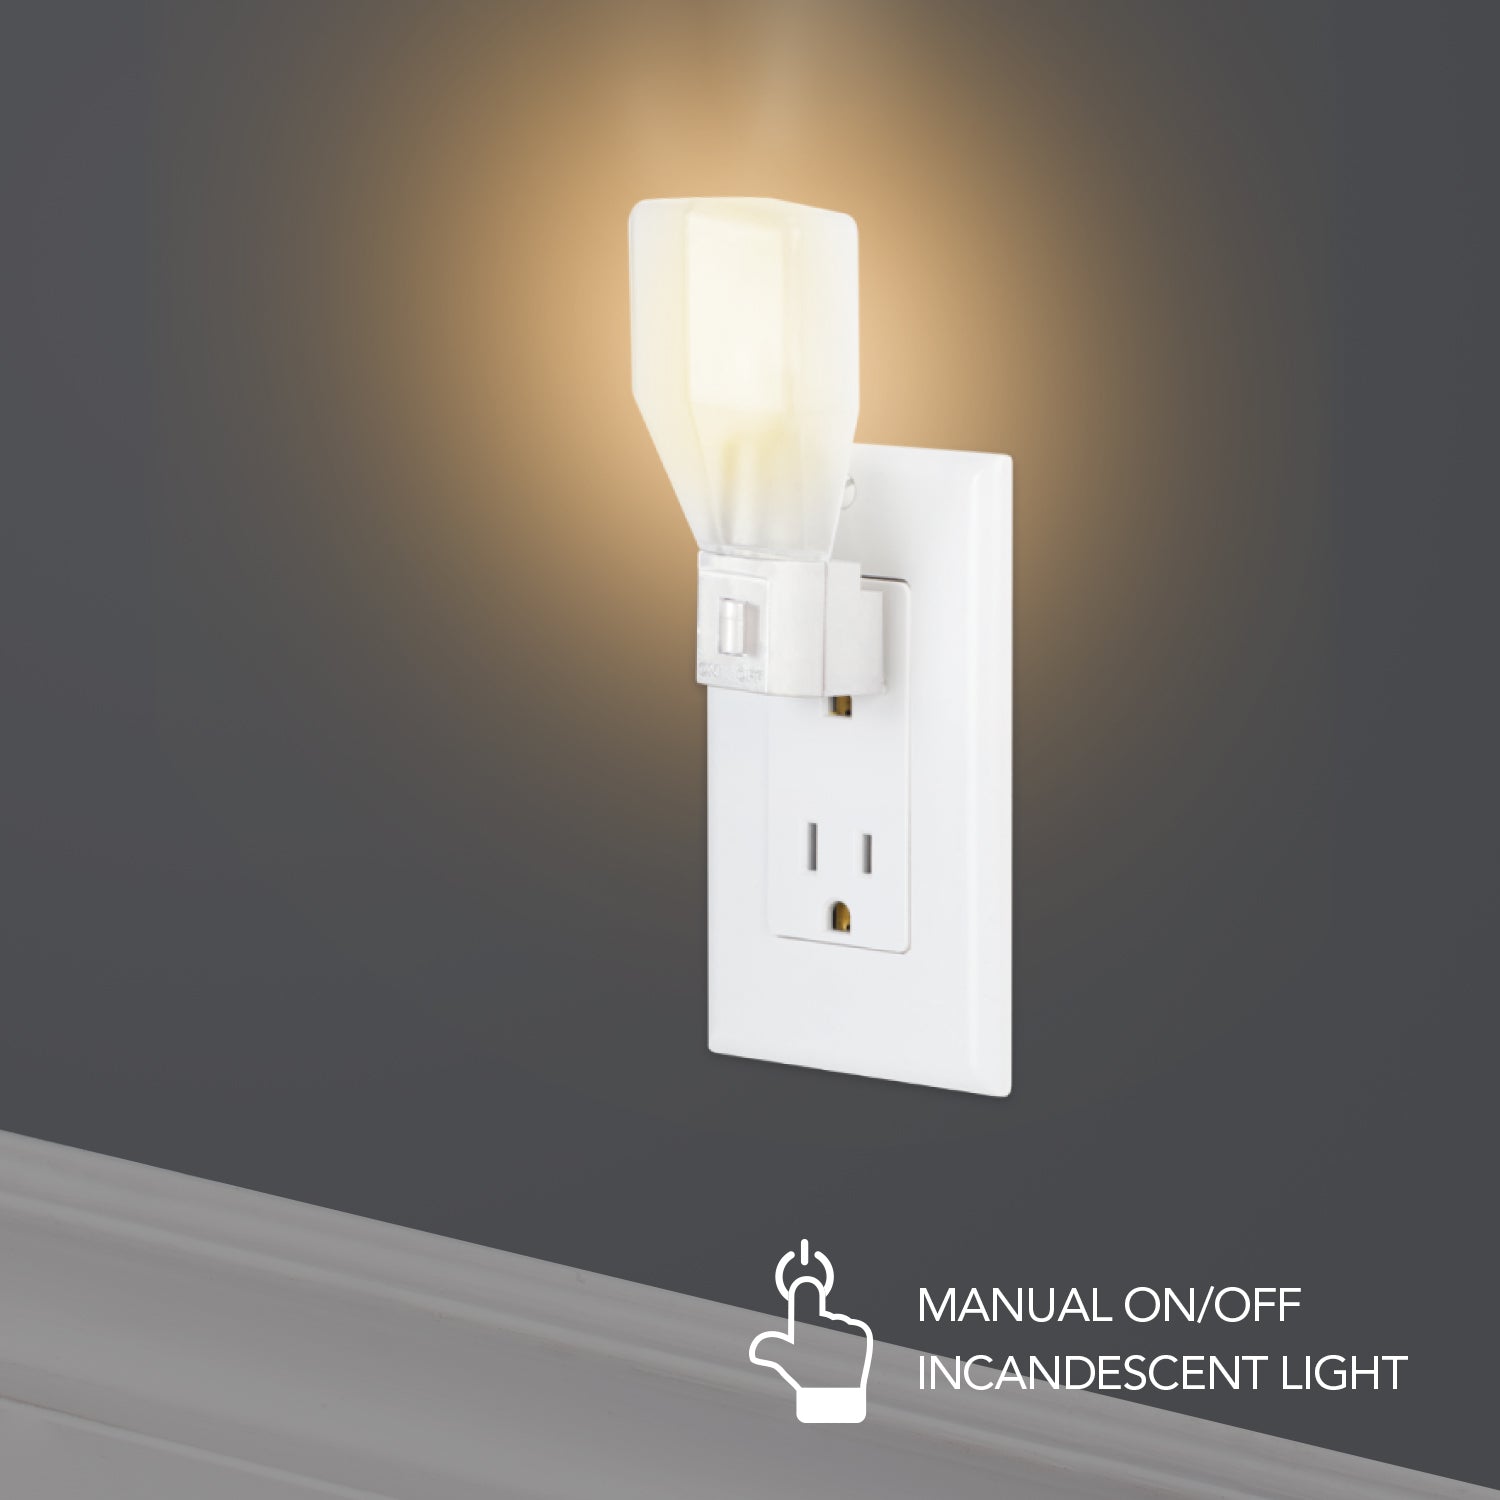 Incandescent Manual On/Off Night Light – White